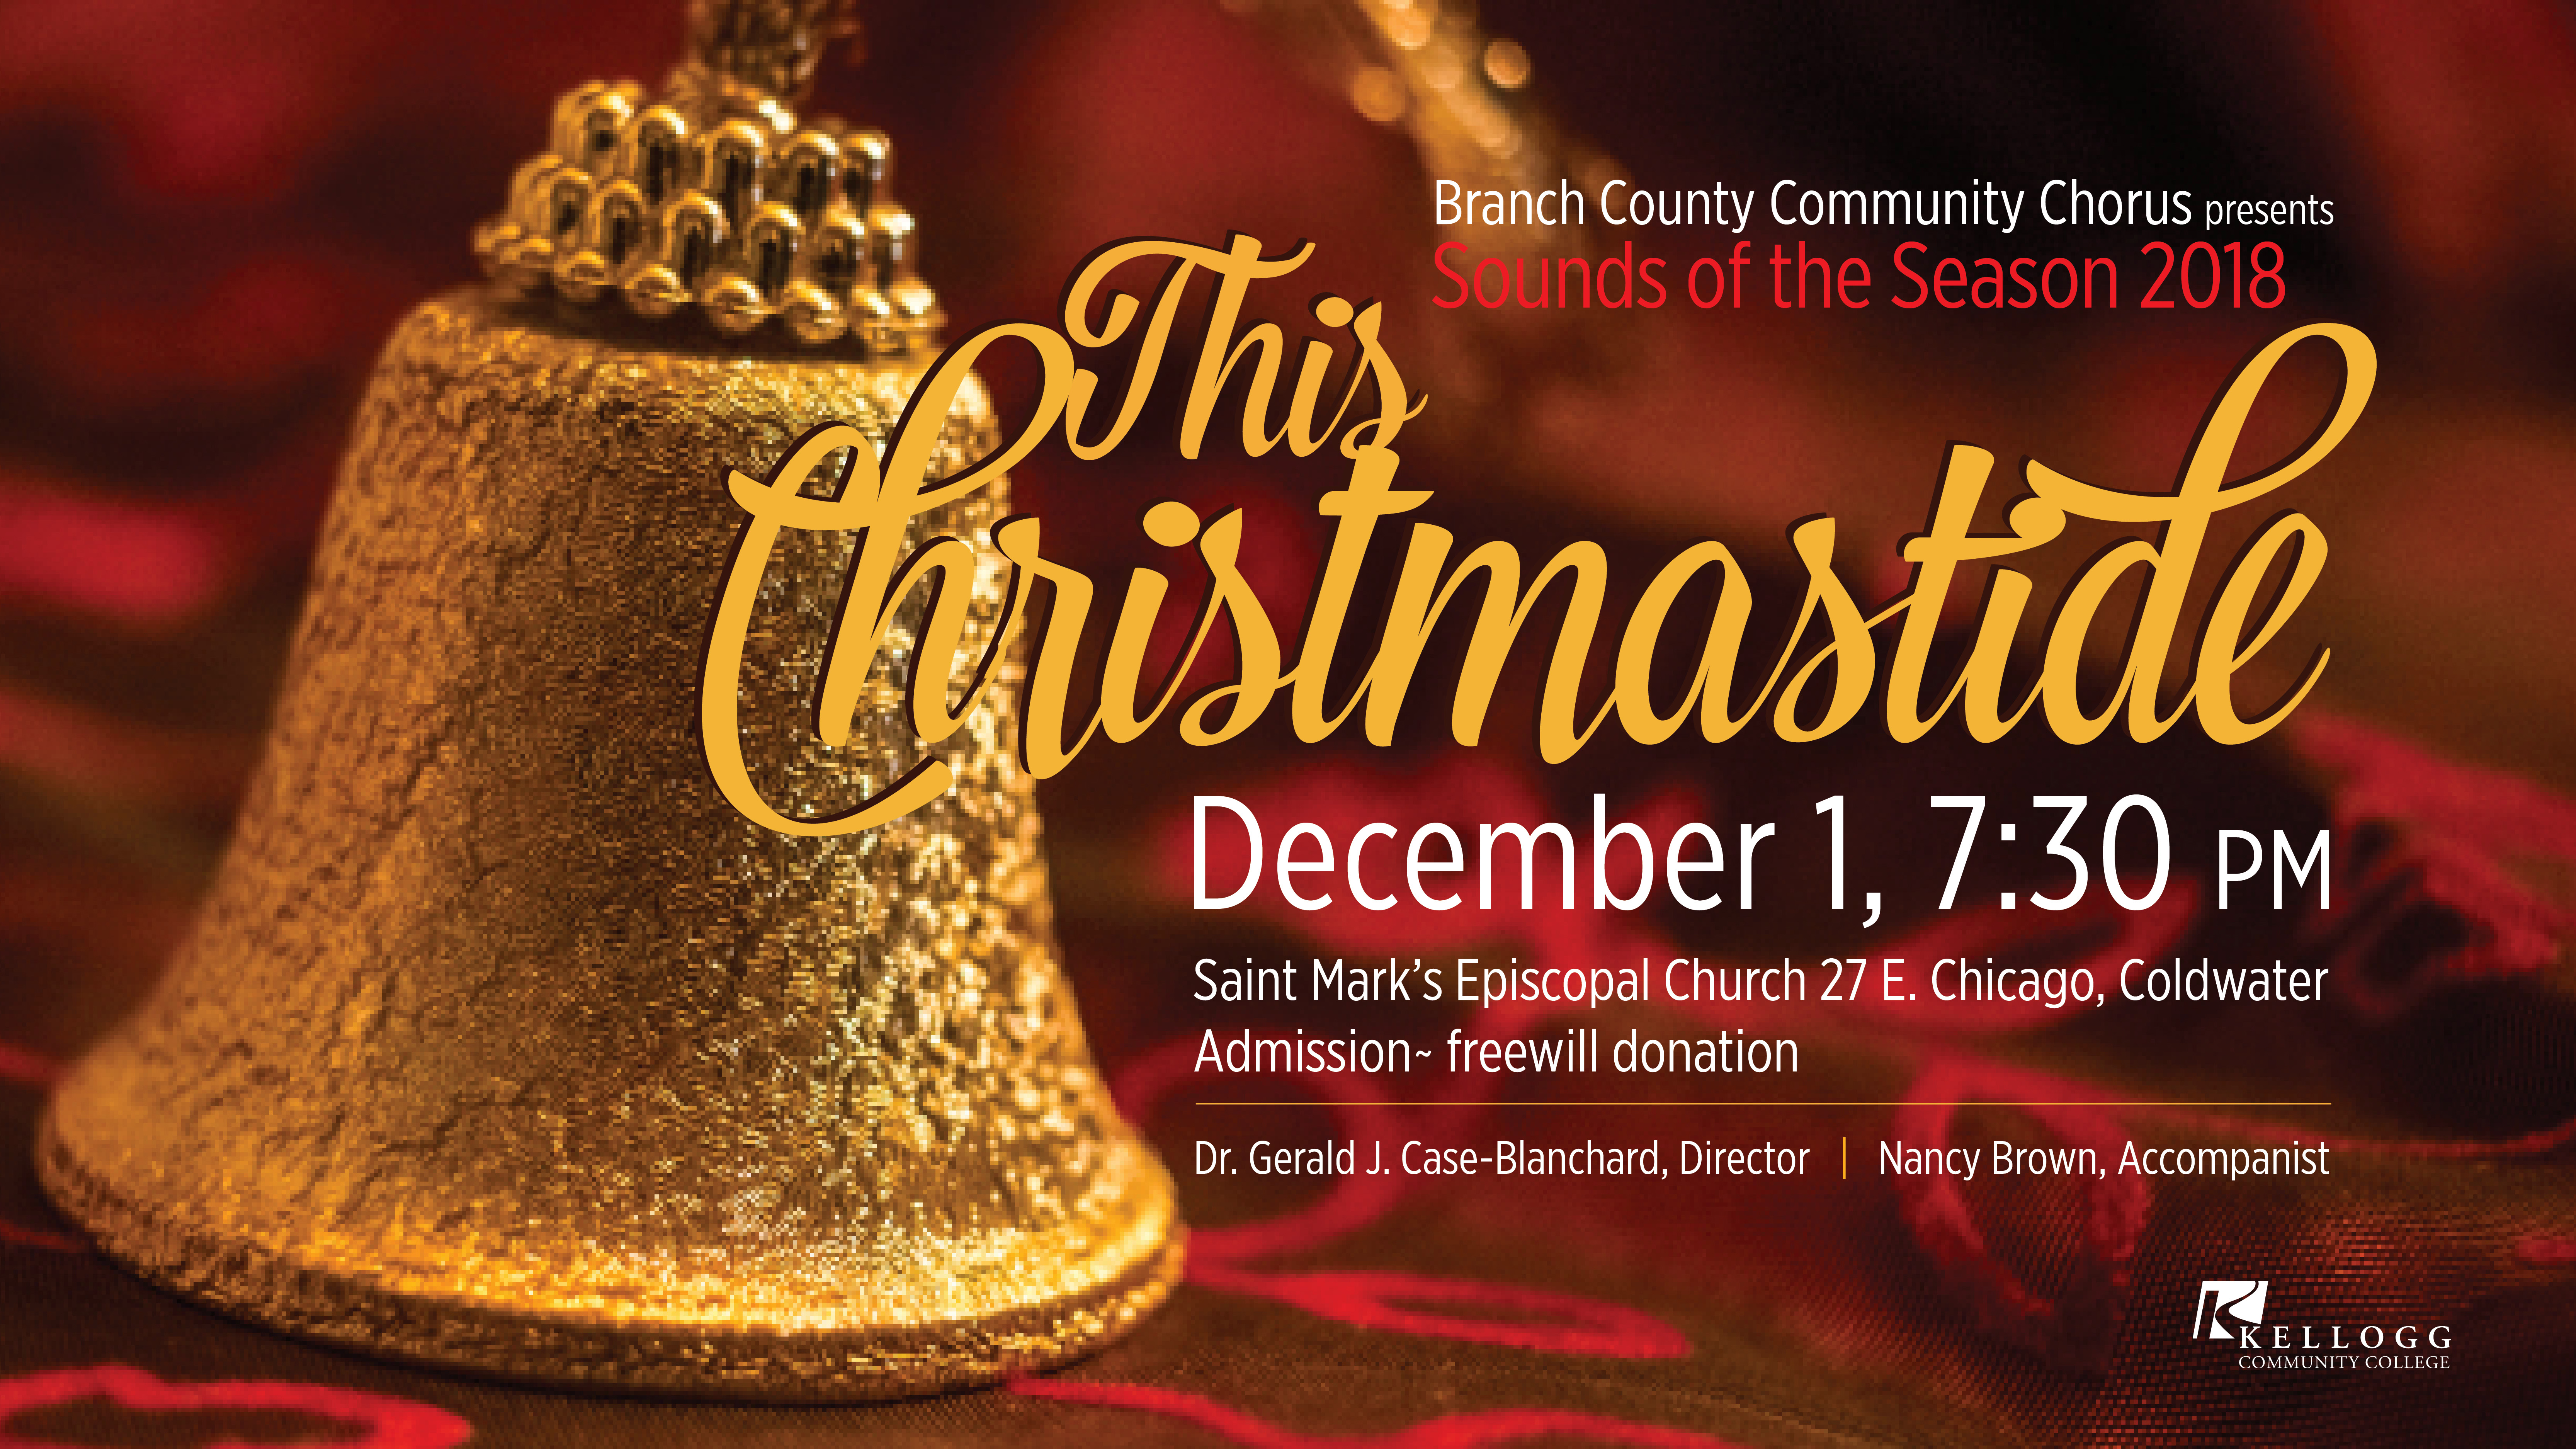 A text slide promoting KCC's upcoming holiday concert.